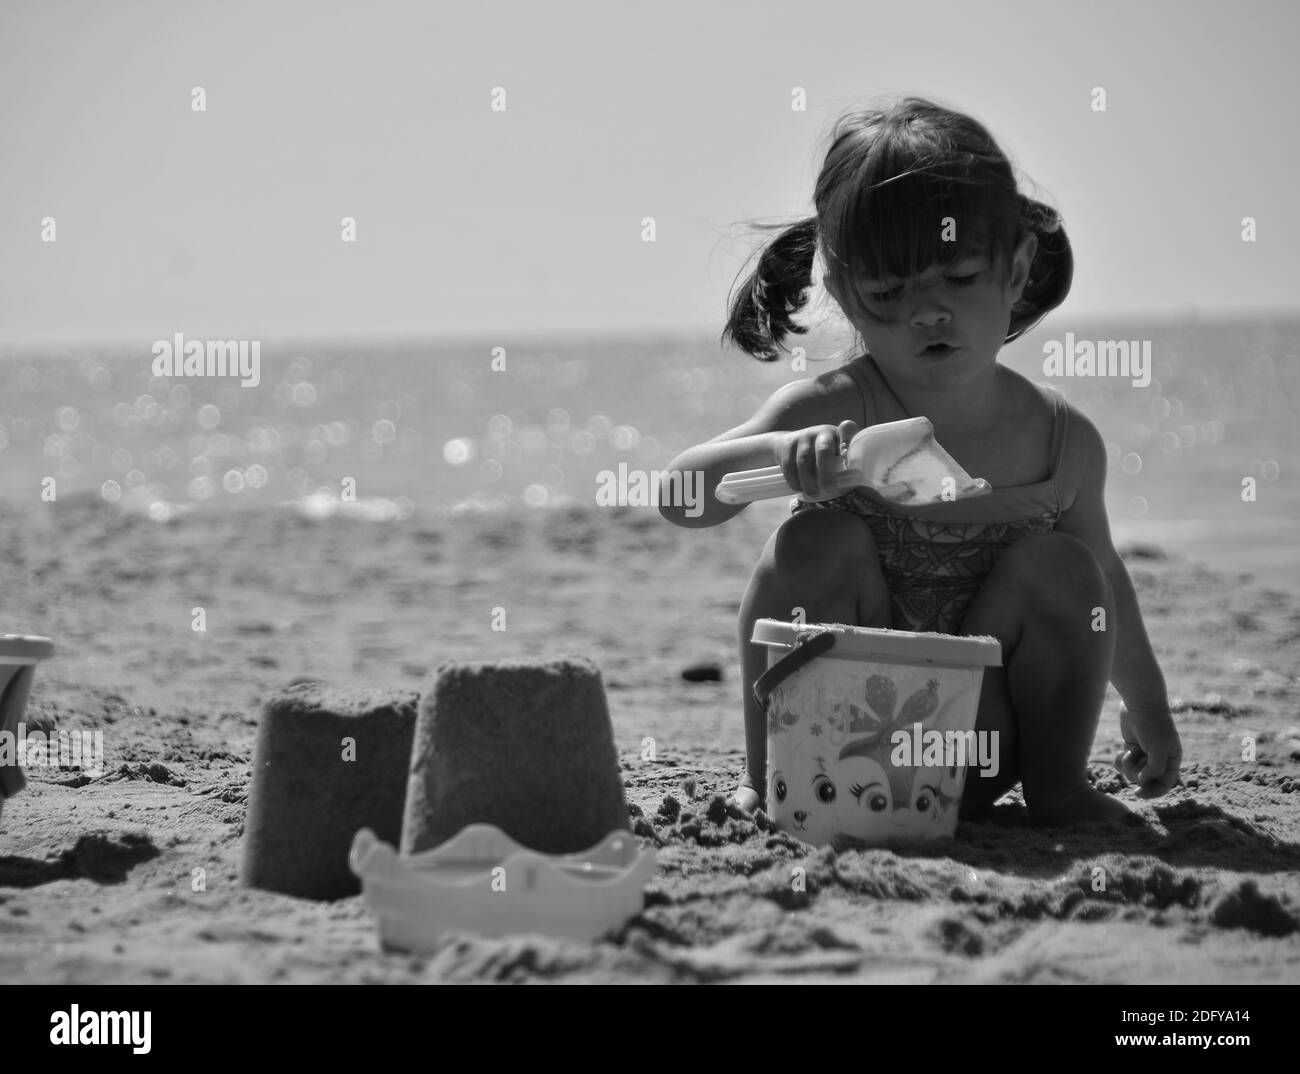 Little girl playing on beach Black and White Stock Photos & Images - Alamy